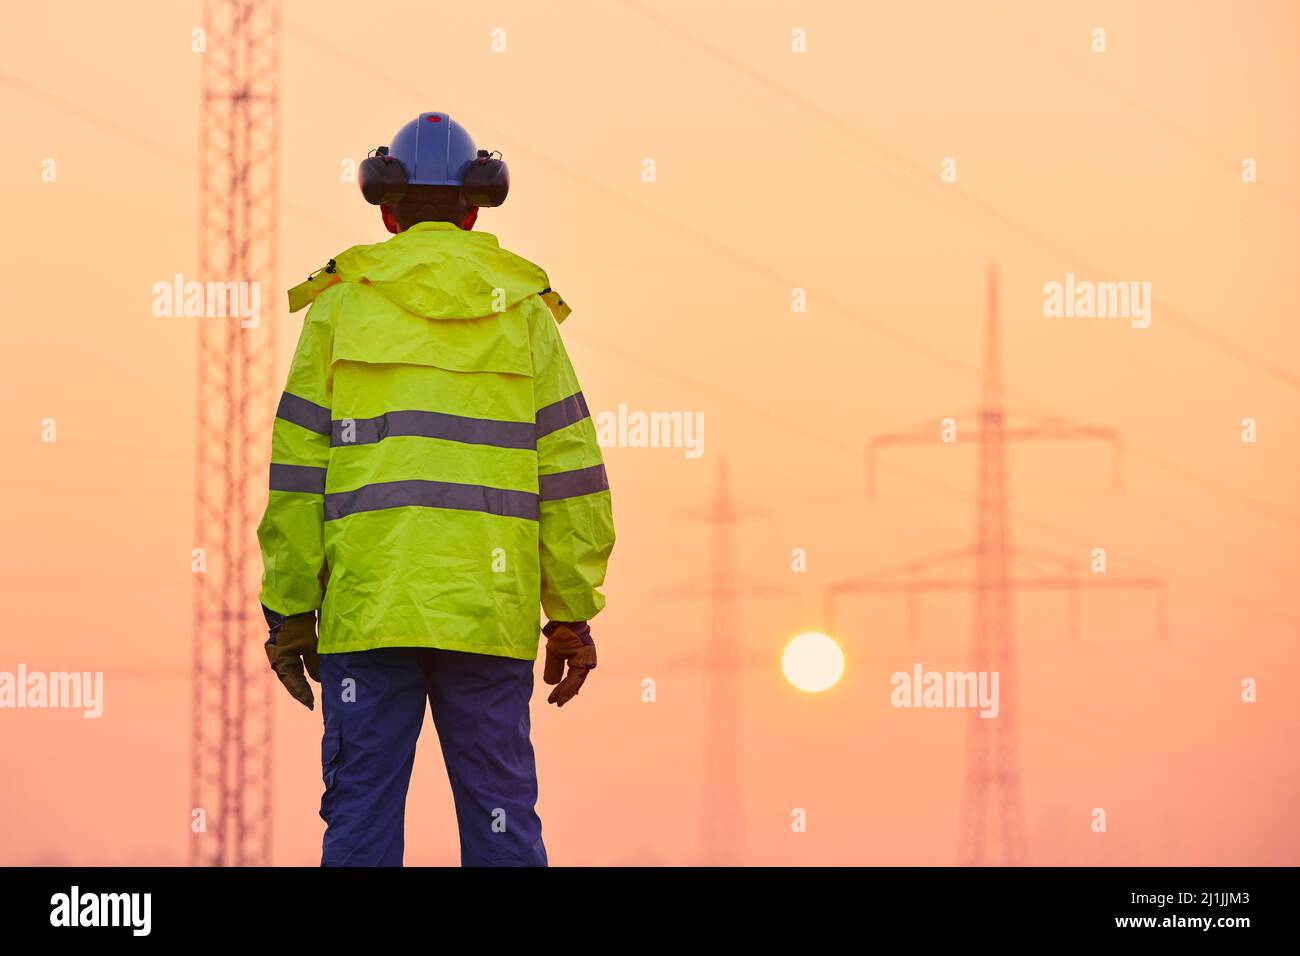 Rear view of electrical engineer against electricity pylons during frosty winter morning. Themes energy supply, industry and environment. Stock Photo